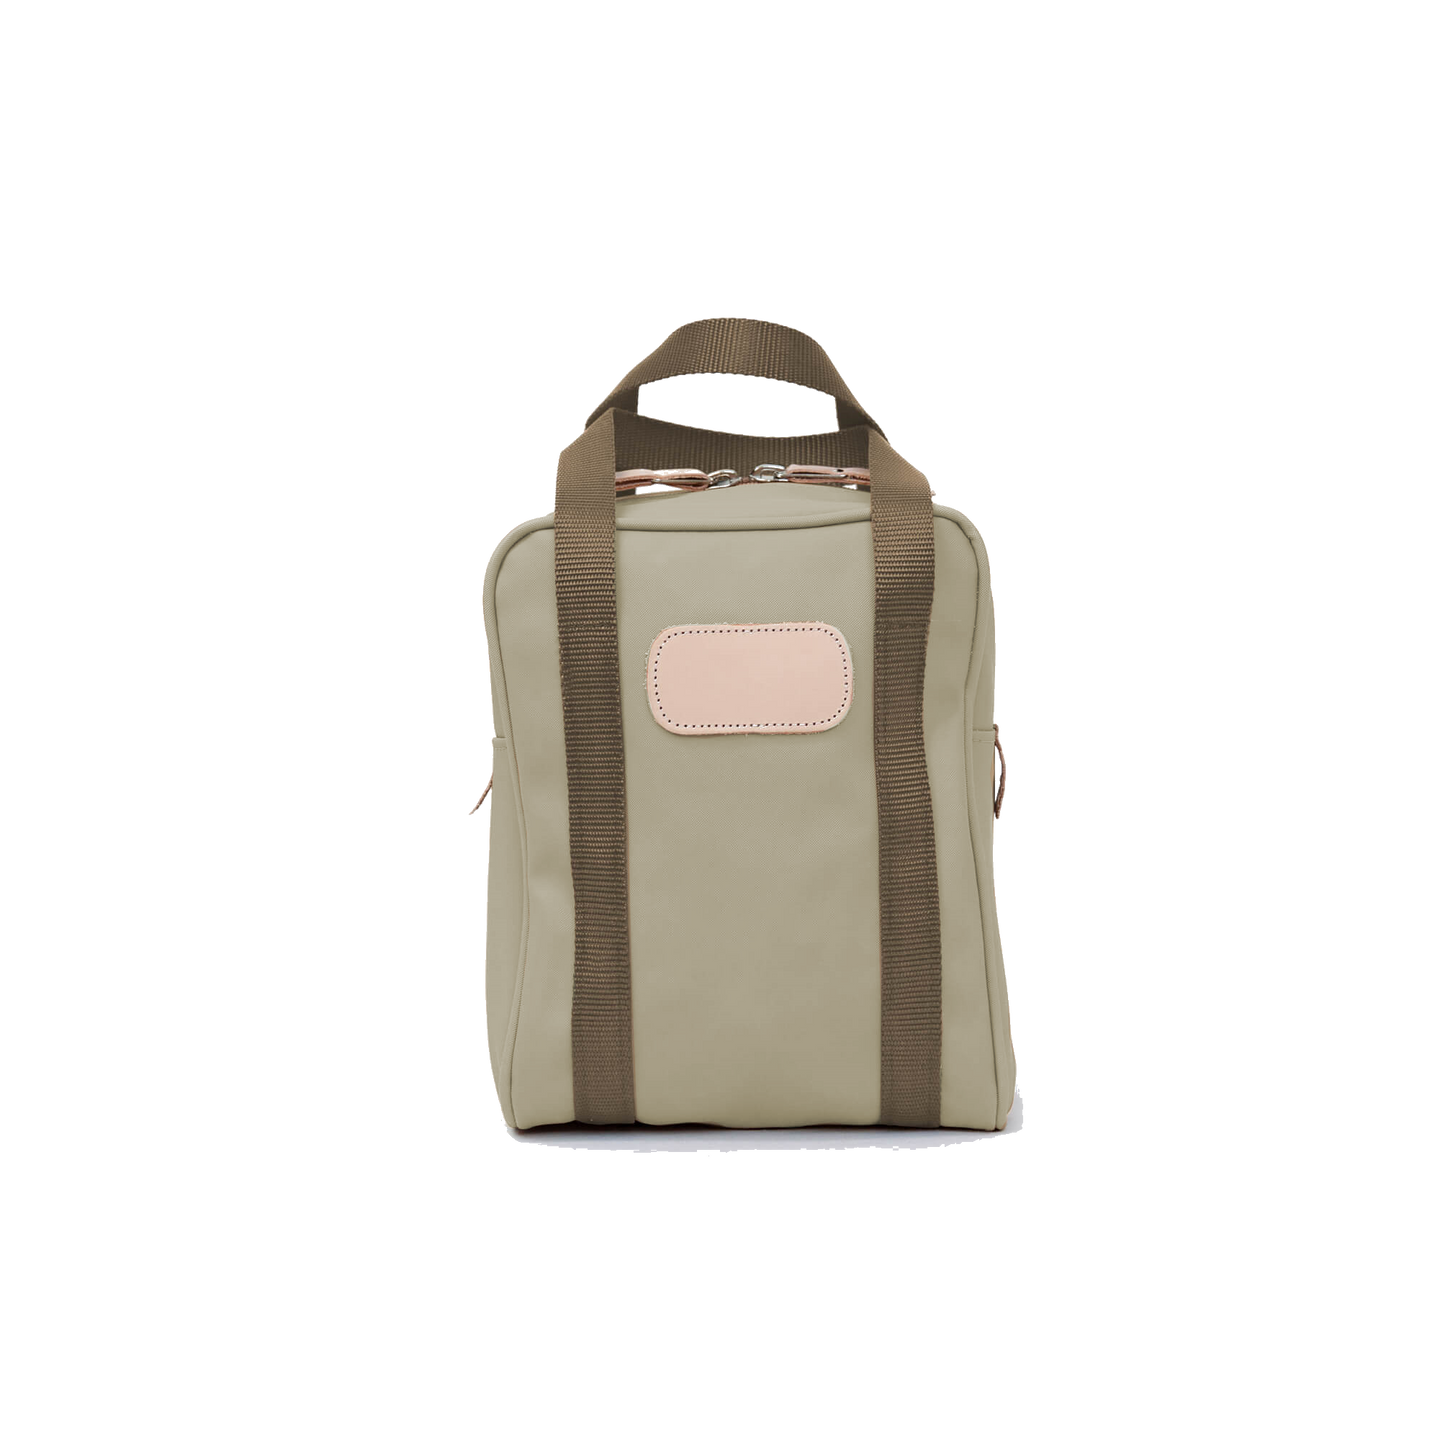 Shag Bag - Tan Coated Canvas Front Angle in Color 'Tan Coated Canvas'